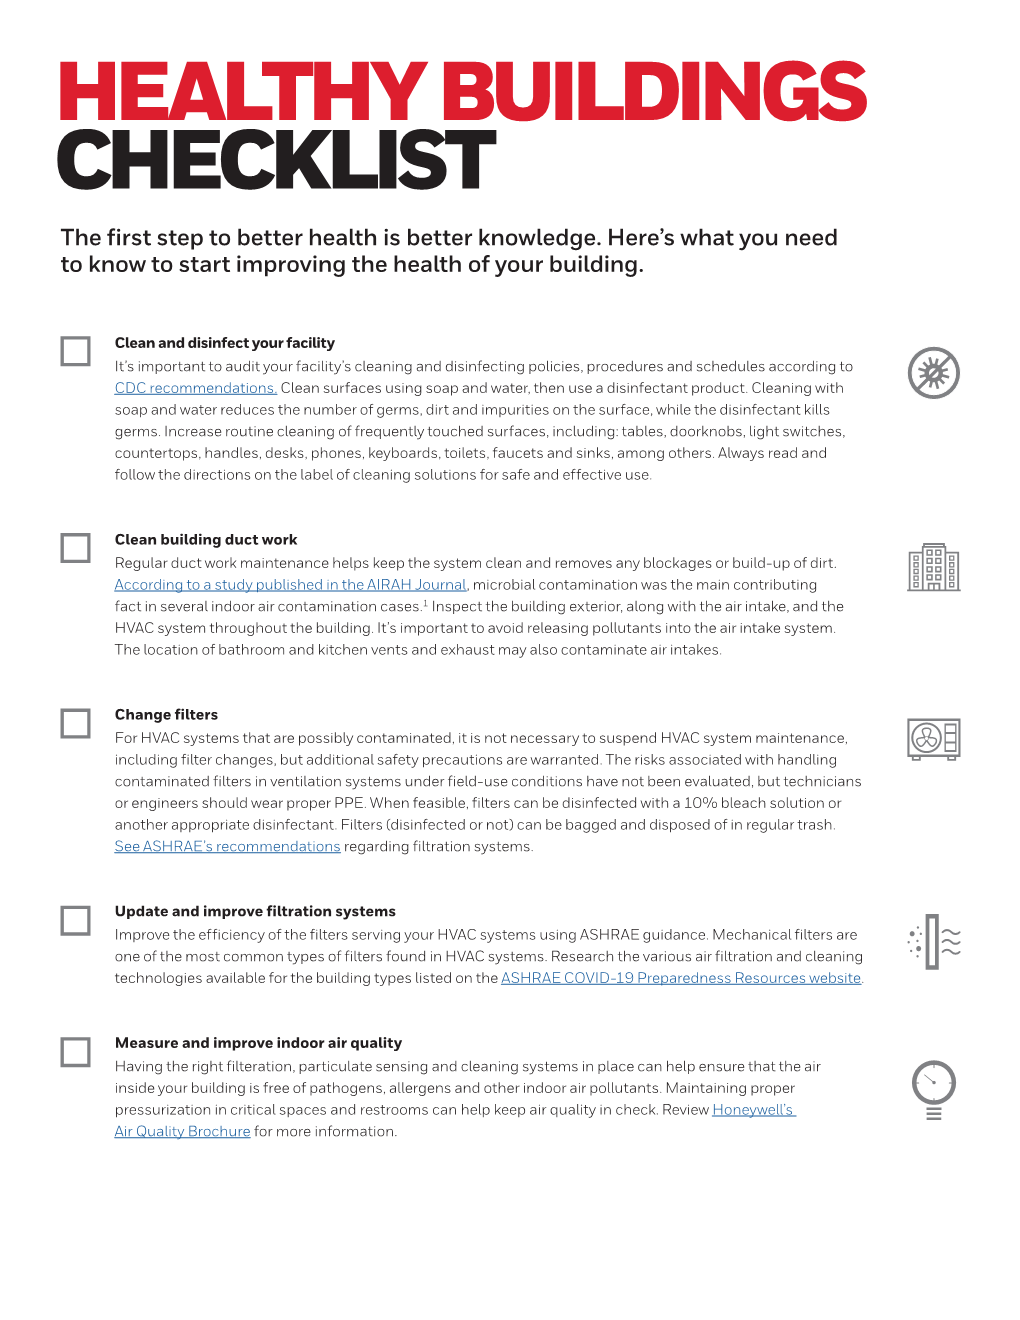 HEALTHY BUILDINGS CHECKLIST the First Step to Better Health Is Better Knowledge